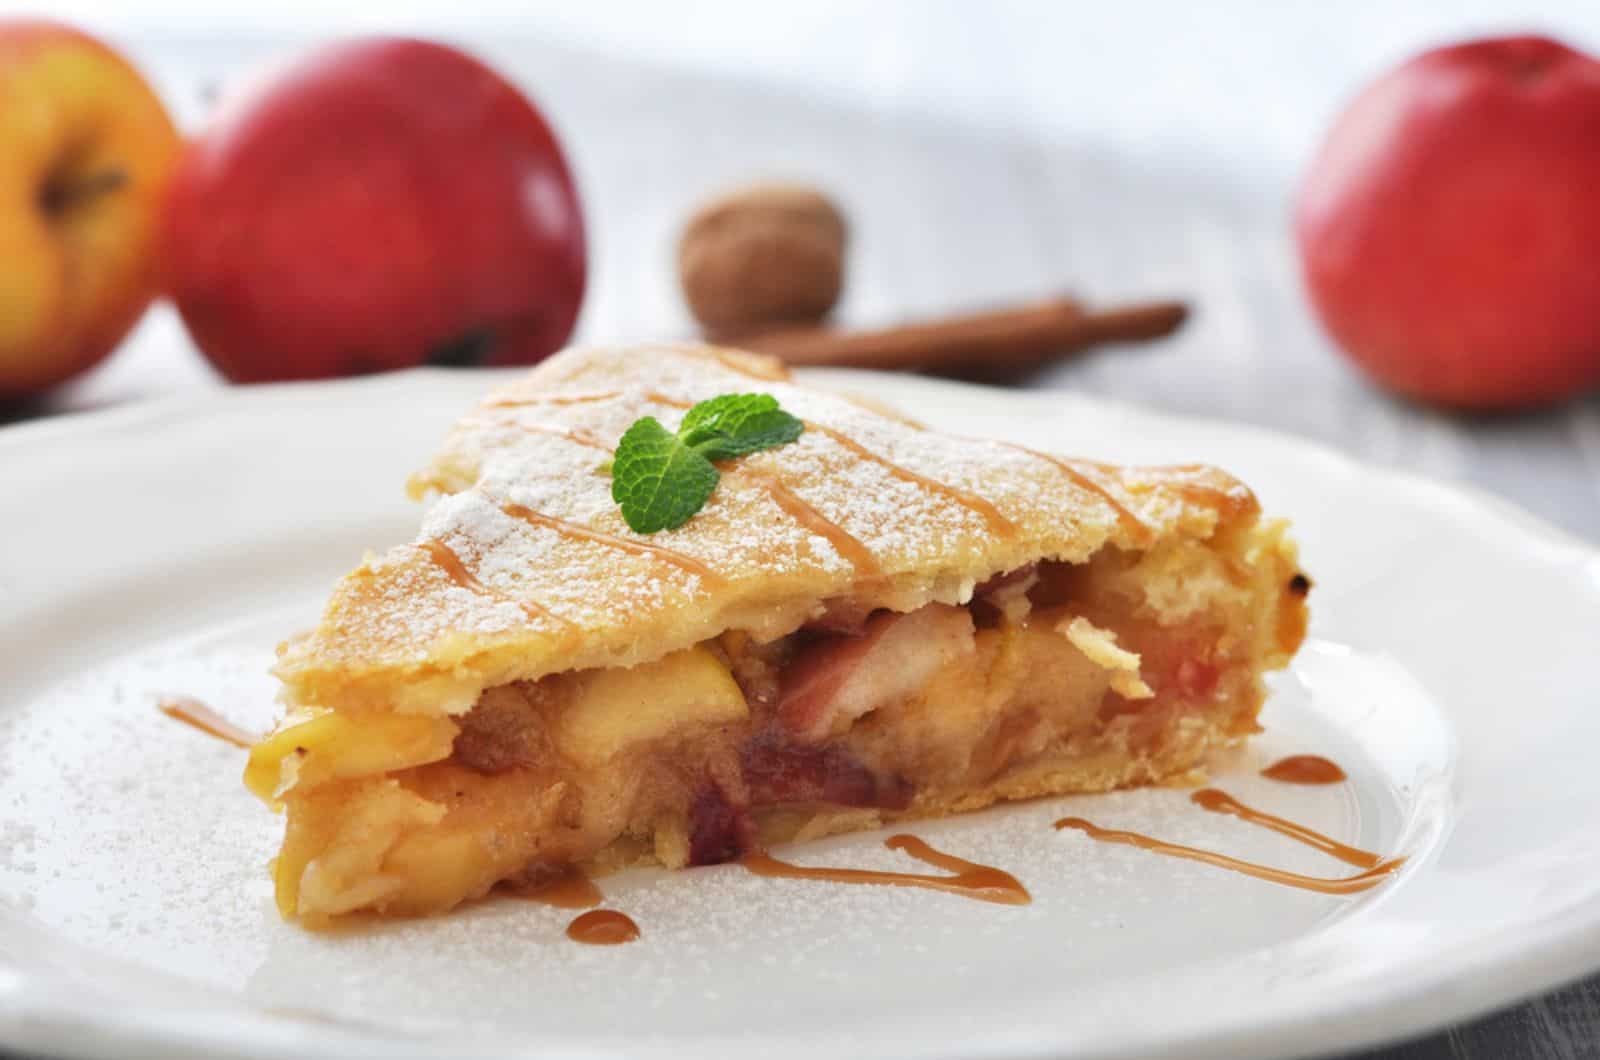 Slice of homemade apple pie with fresh apples